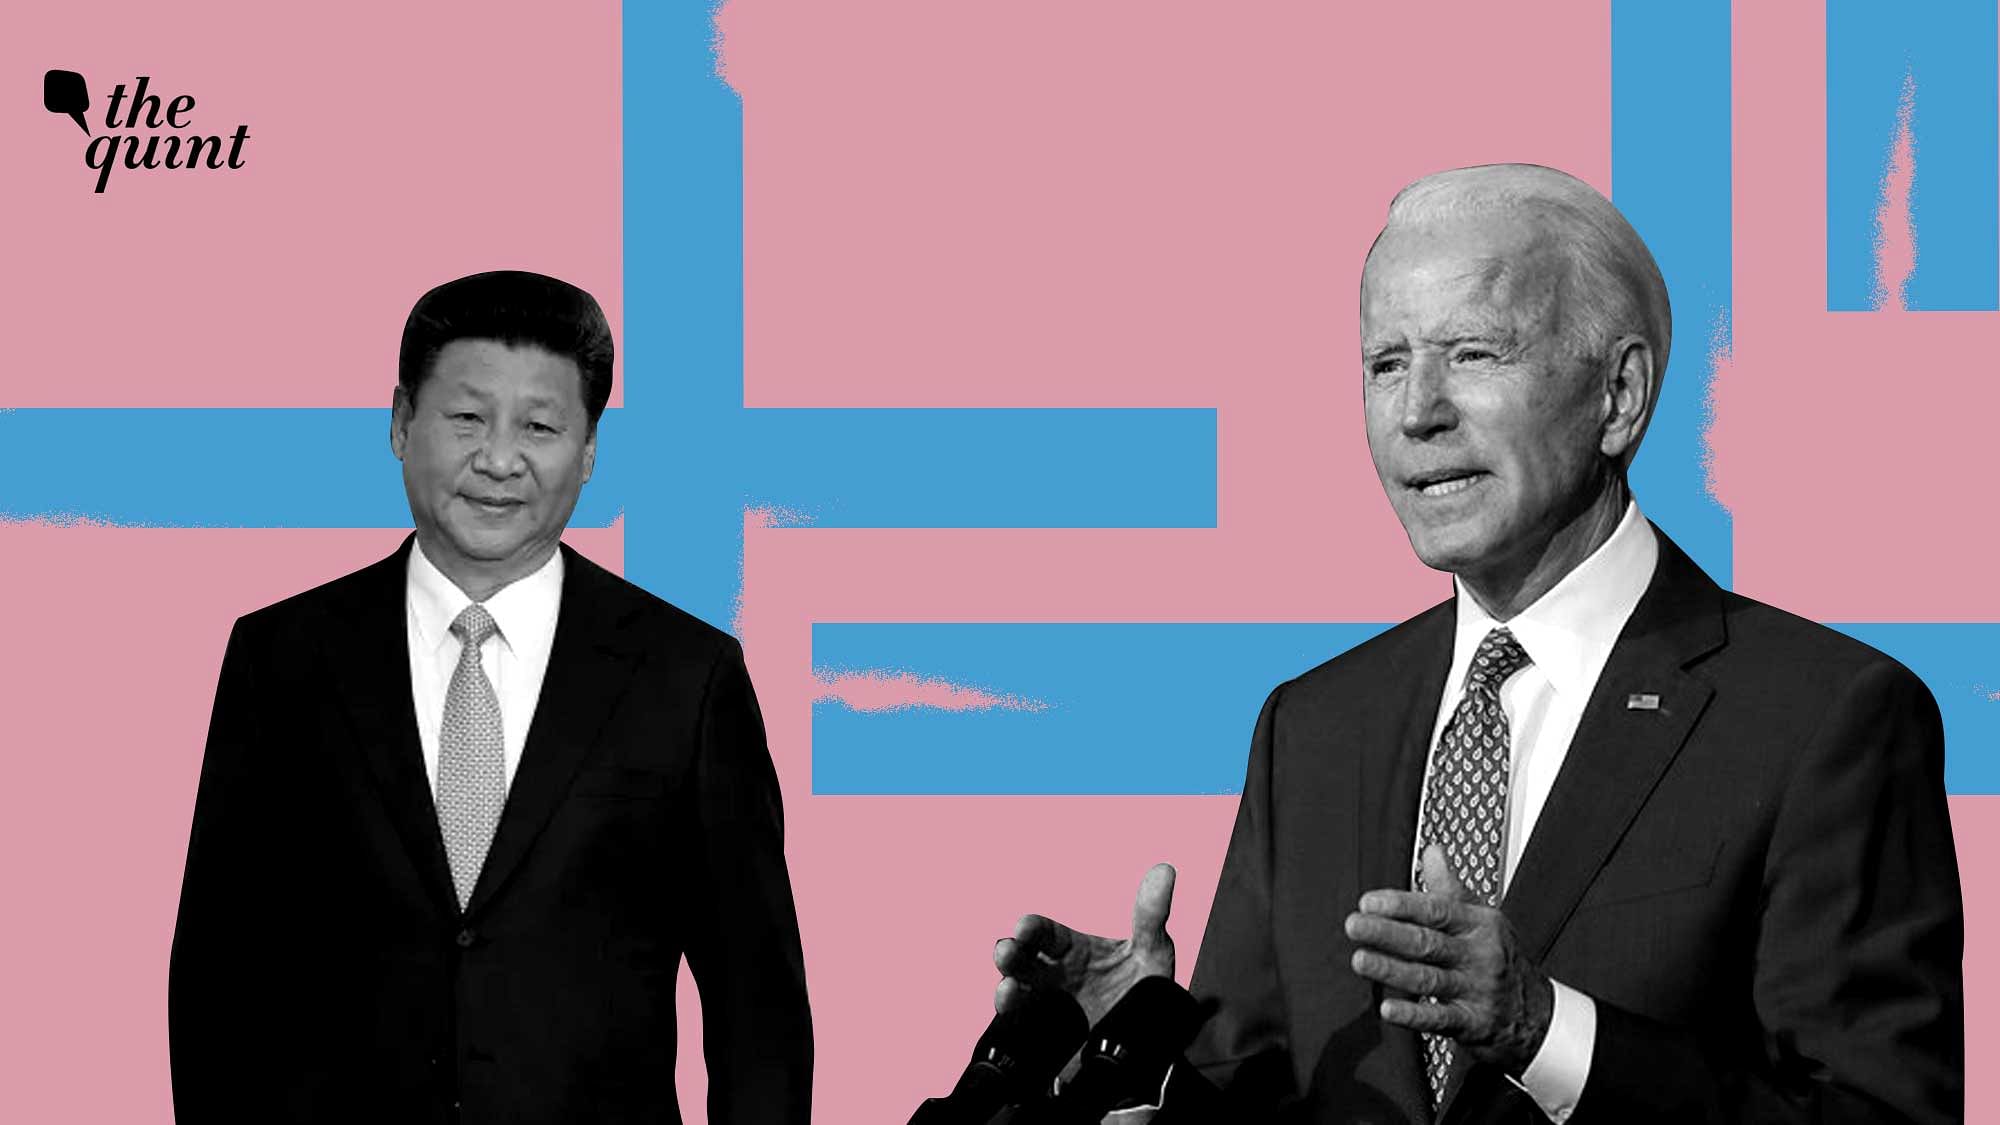 US President Joe Biden made his feelings clear on China, Russia, and Afghanistan in his 1st press briefing. (Image used for representational purposes only.)